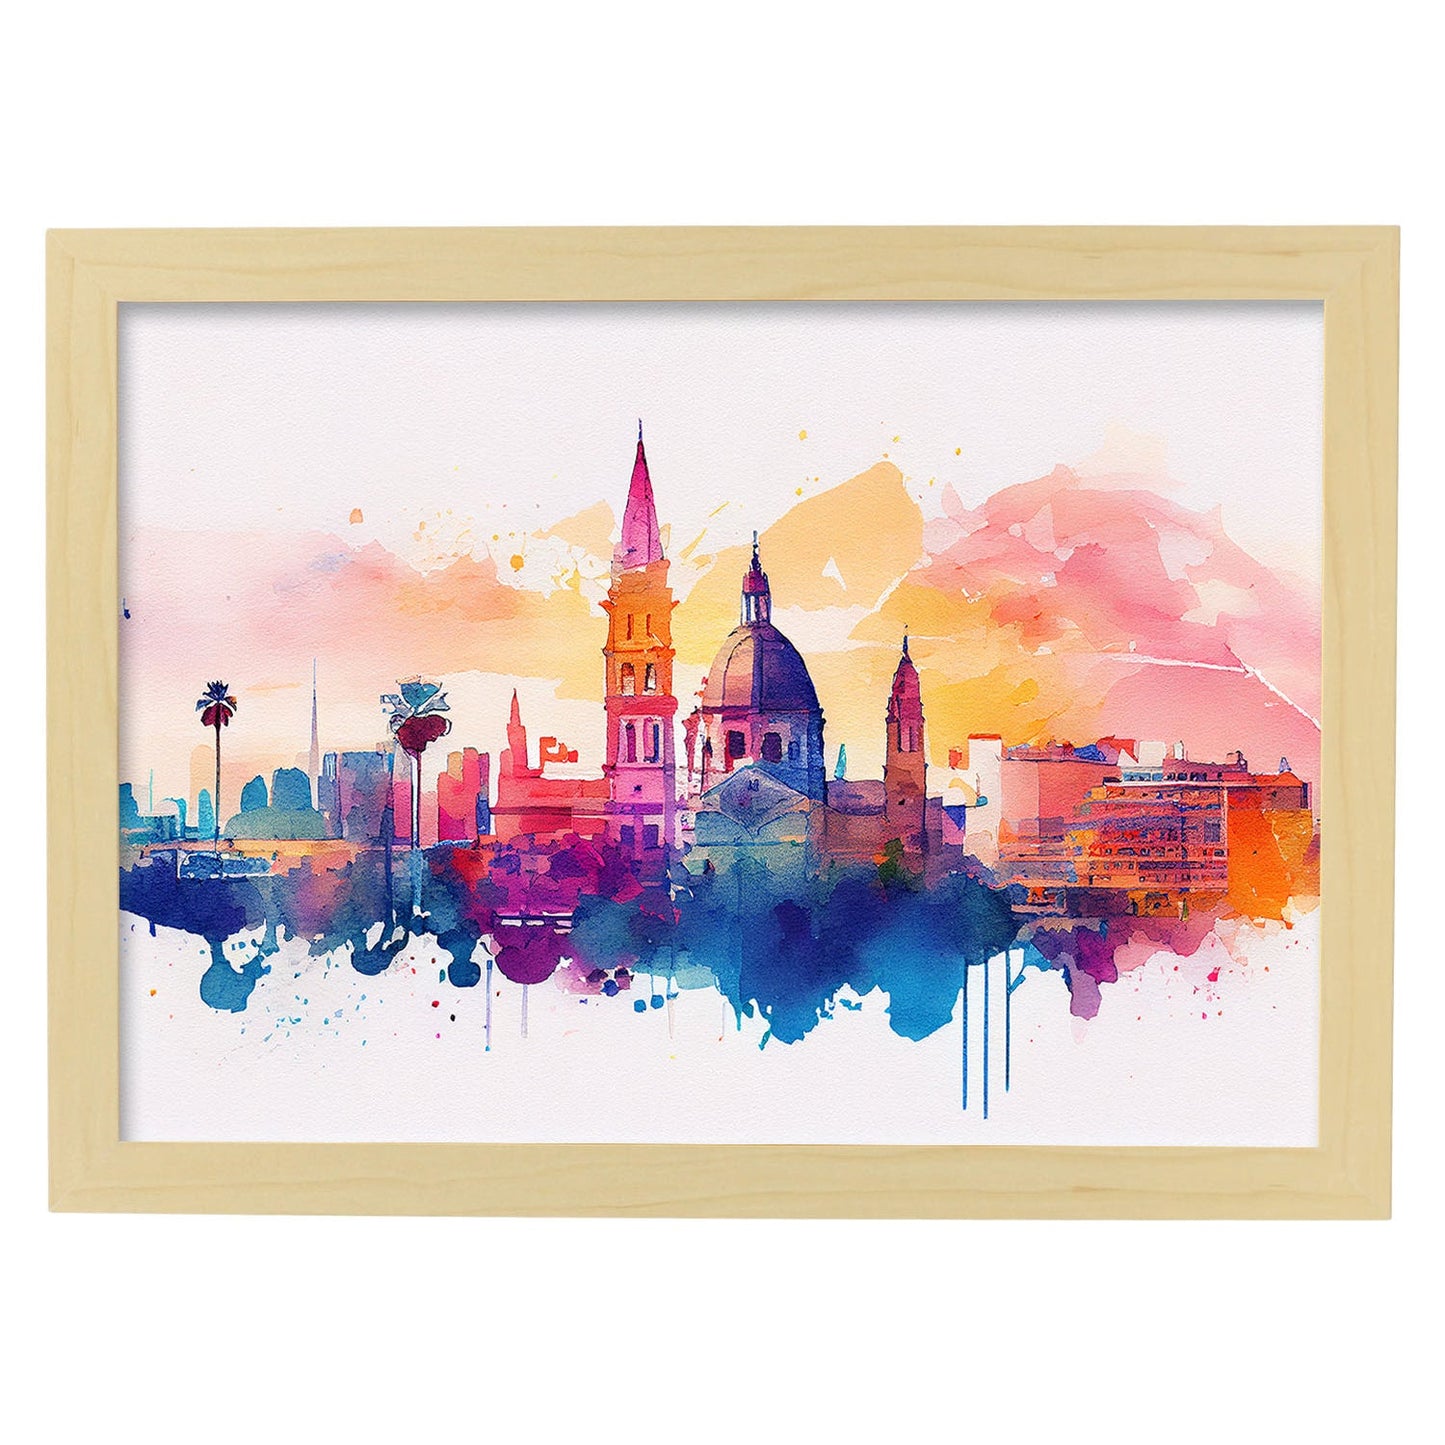 Nacnic watercolor of a skyline of the city of Valencia_1. Aesthetic Wall Art Prints for Bedroom or Living Room Design.-Artwork-Nacnic-A4-Marco Madera Clara-Nacnic Estudio SL